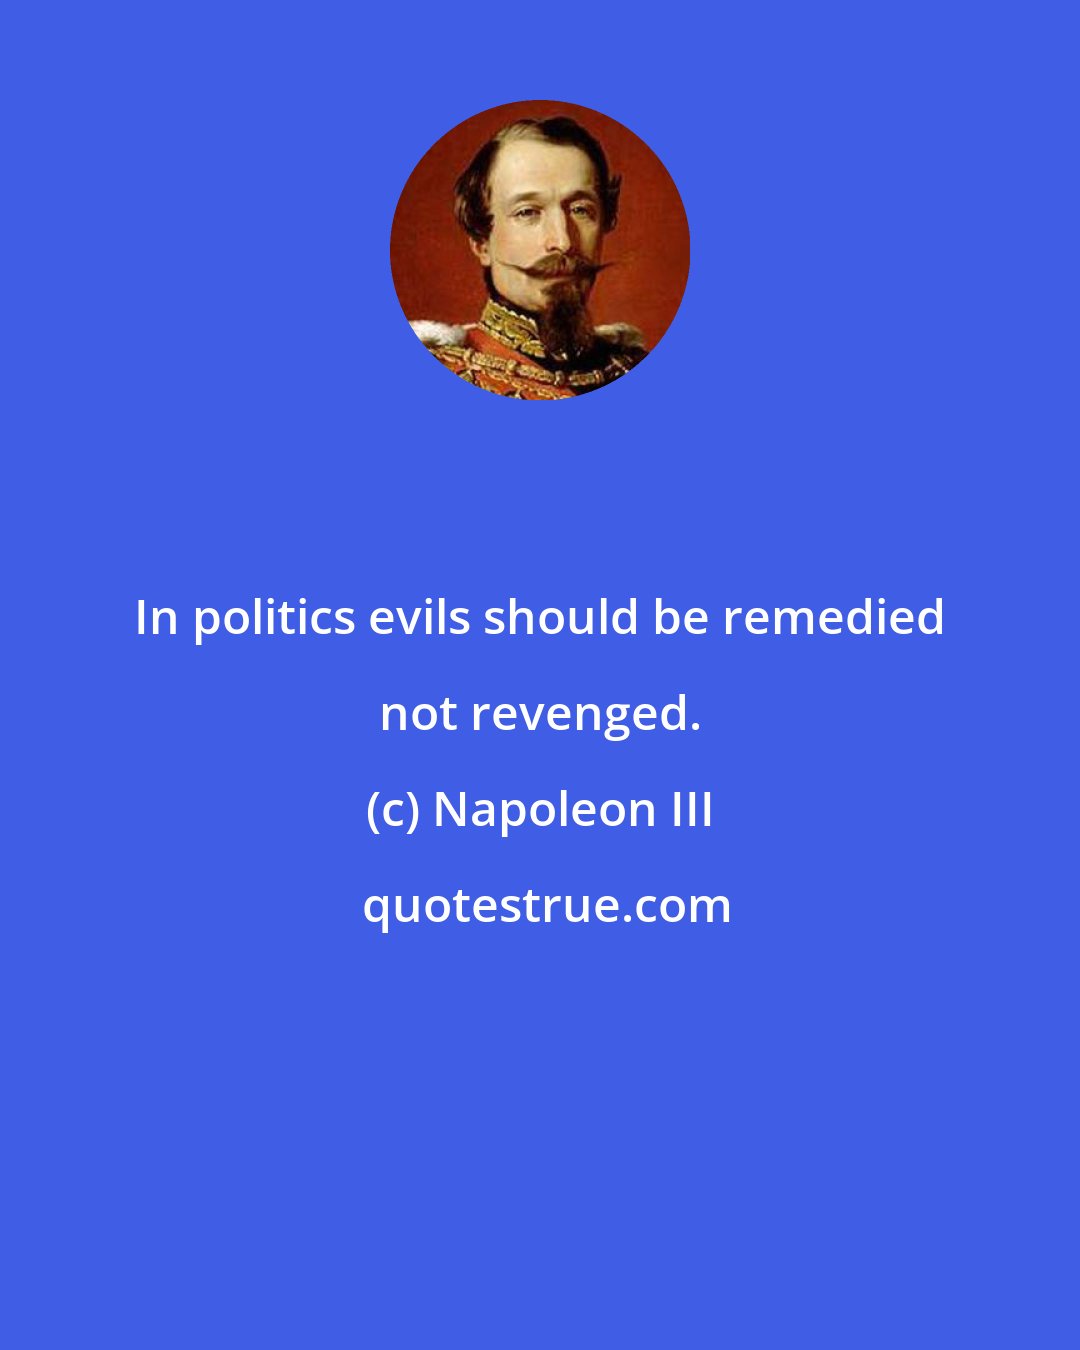 Napoleon III: In politics evils should be remedied not revenged.